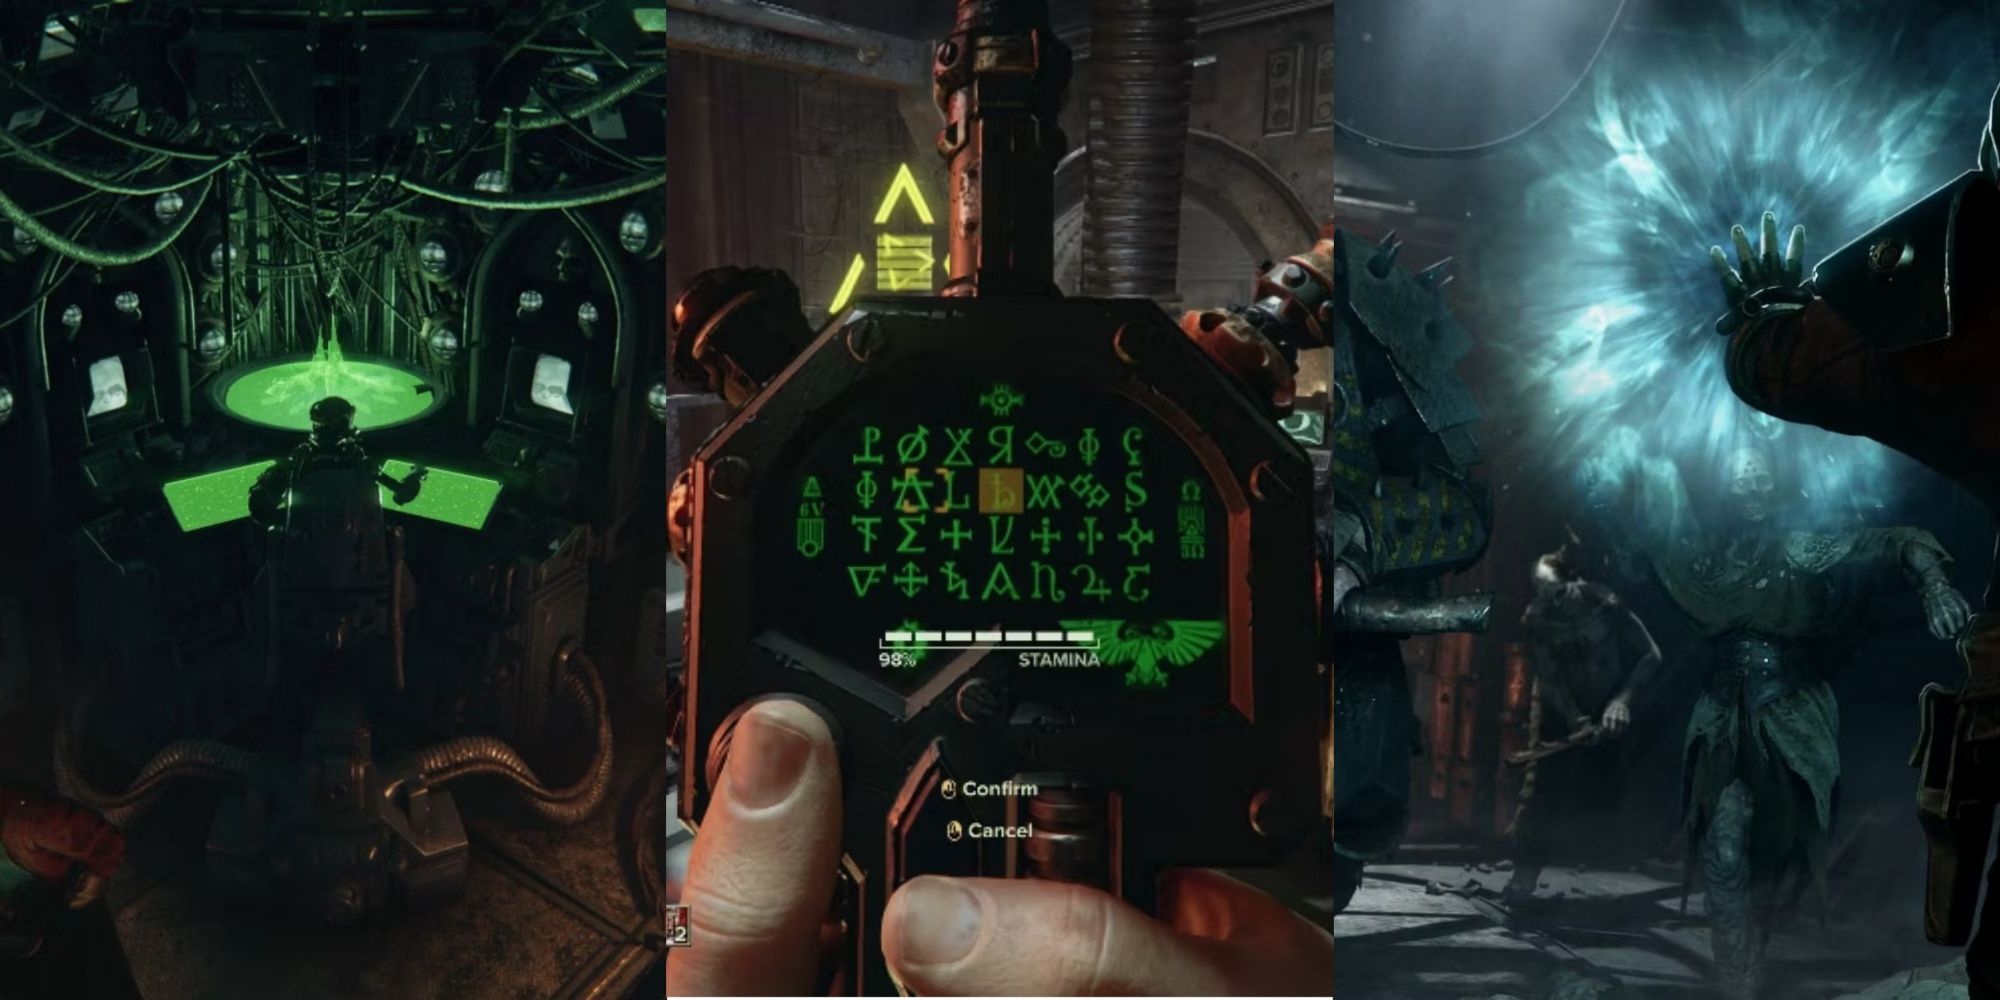 imperial datasmiths at work, hand holding a device in the hacking minigame, and Psyker Using Powers Against Armored in Warhammer 40,000 Darktide.